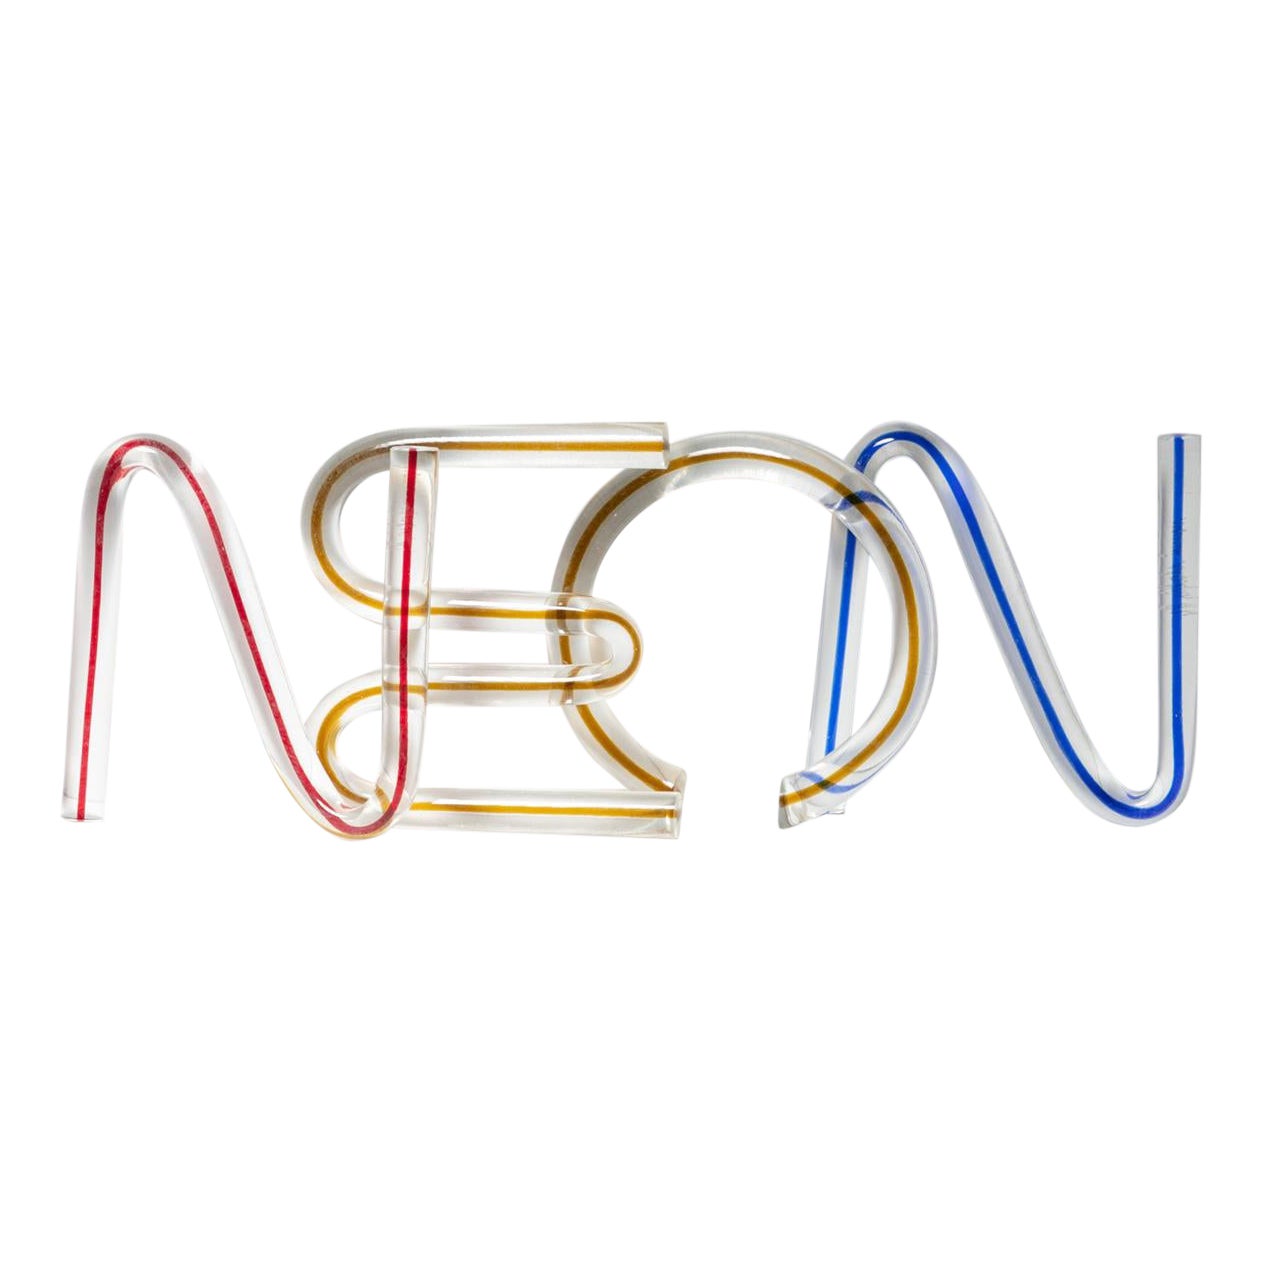 "N" "E" "O" "N" Crystal Letters by Massimo Vignelli for Venini, Italy, 1980s For Sale